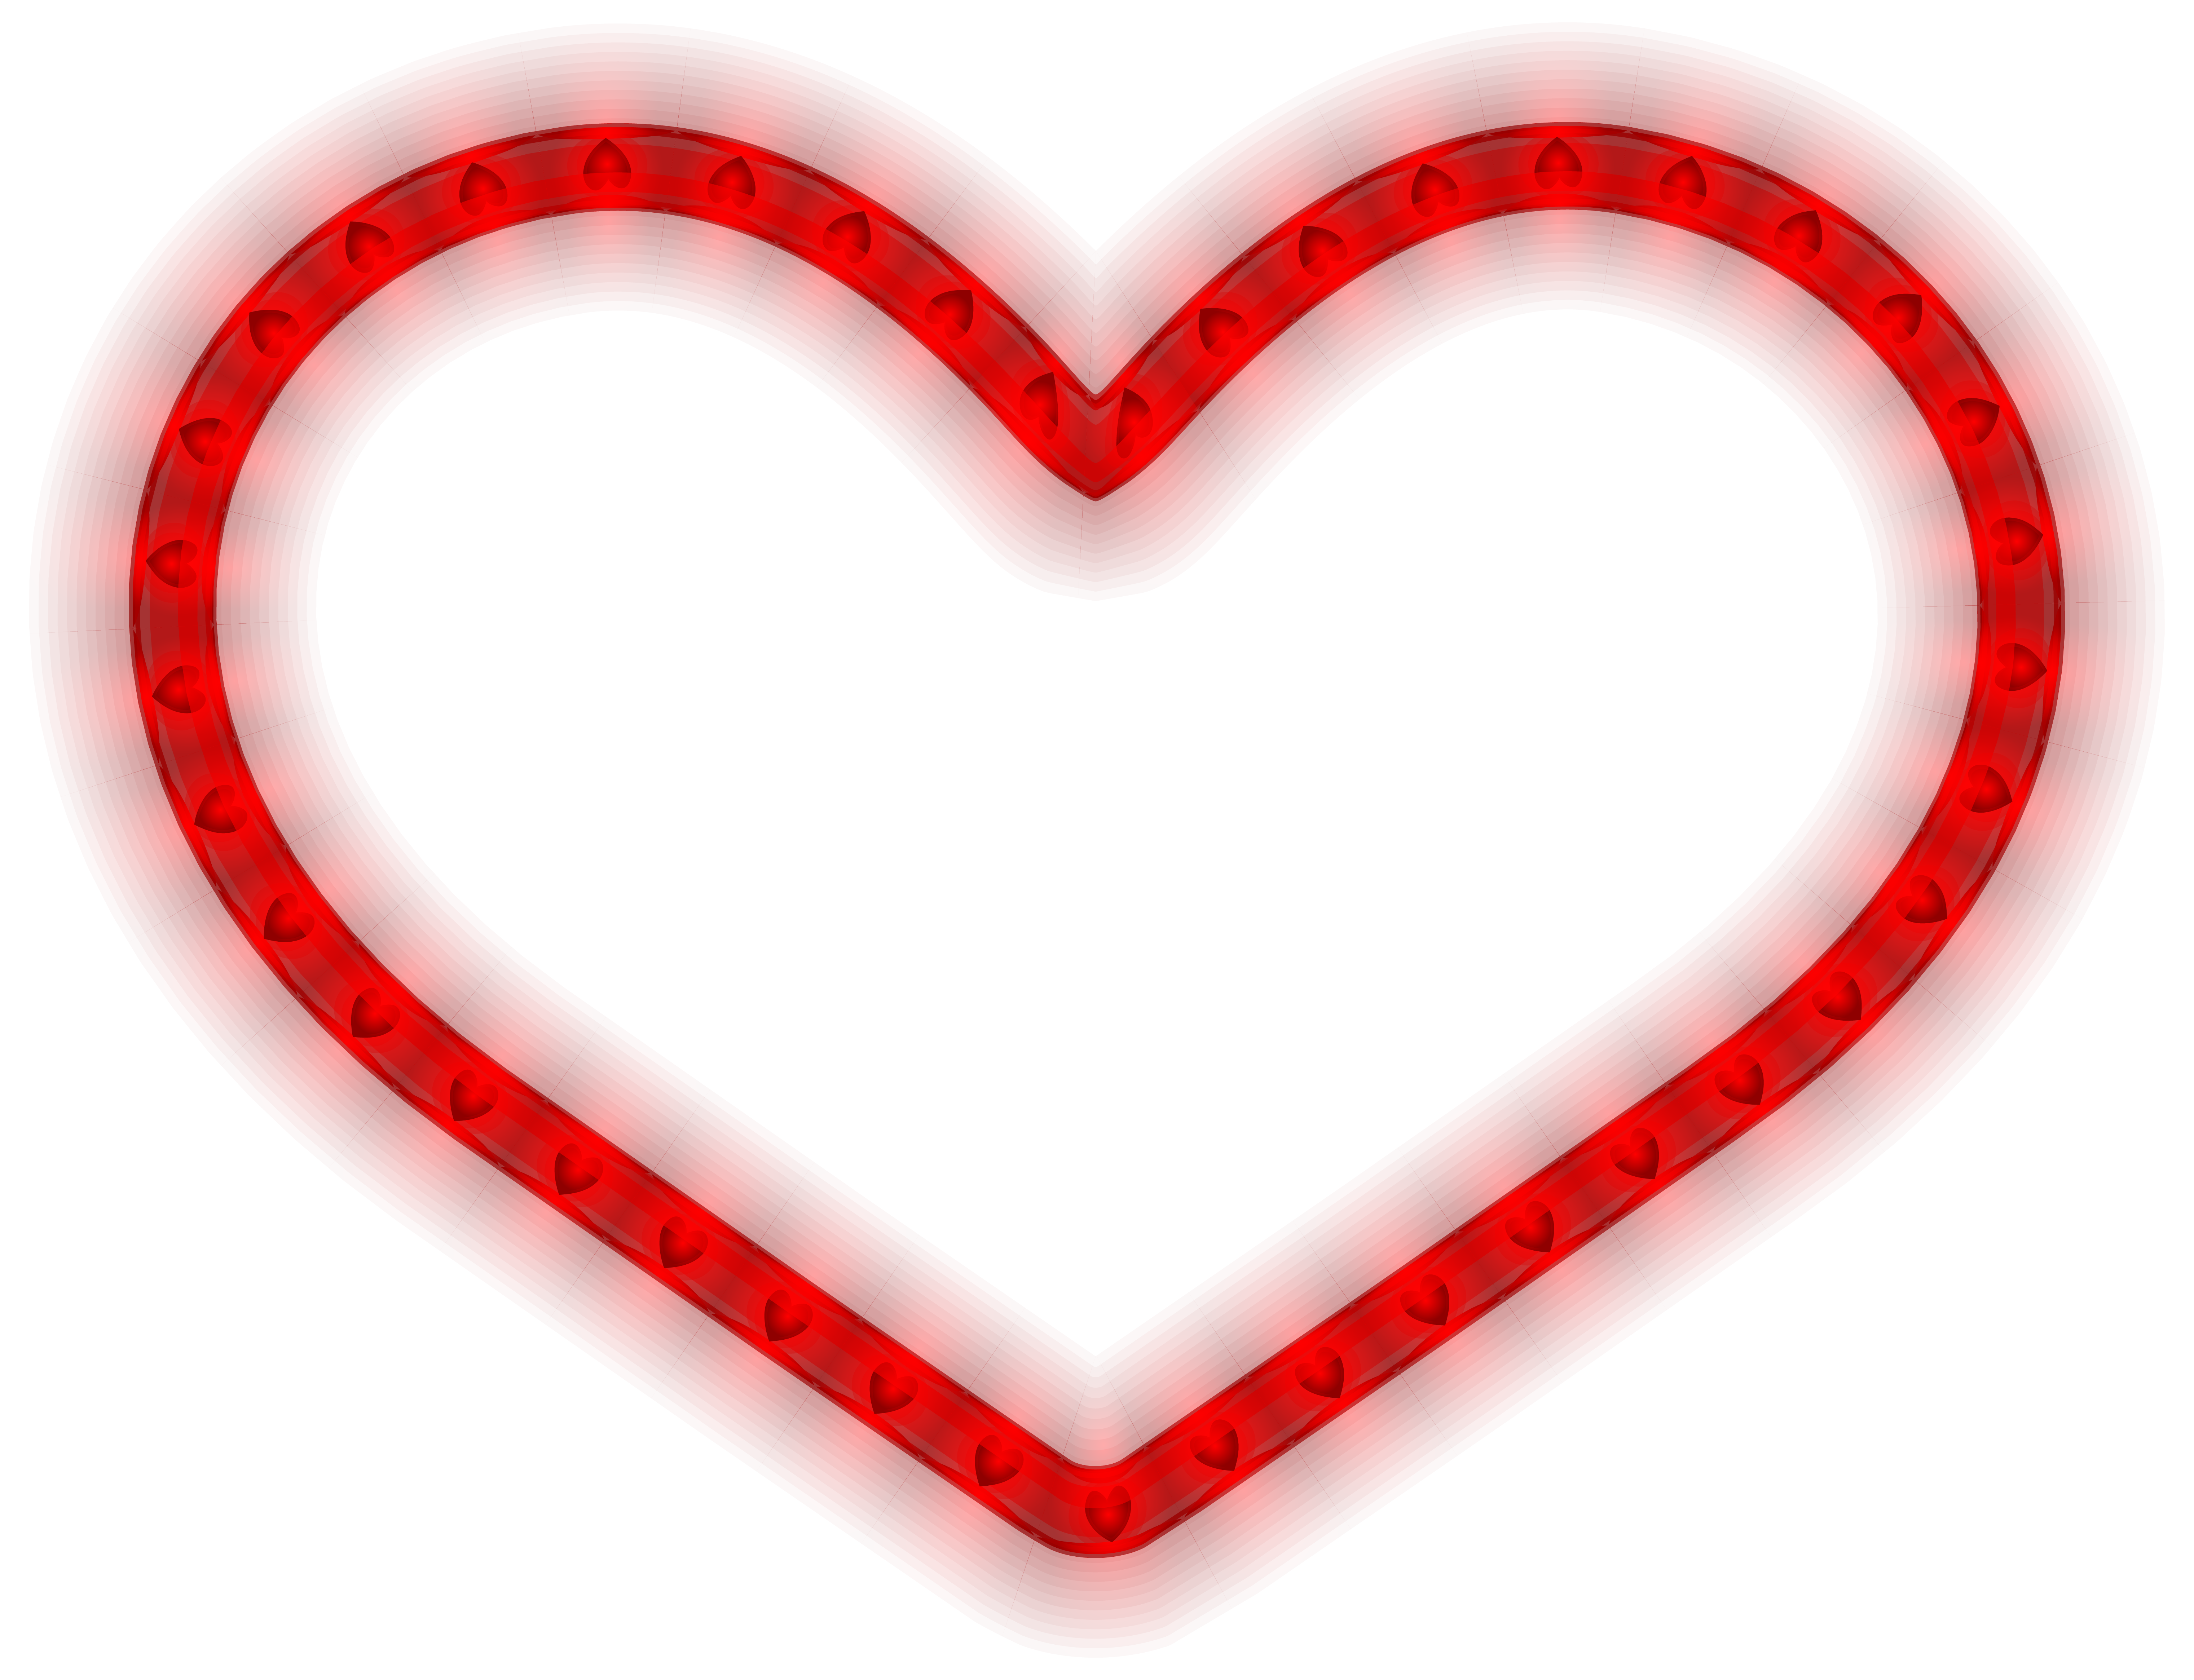 Glowing Heart Png Clipart Image Gallery Yopriceville High Quality Images And Transparent Png Free Clipart